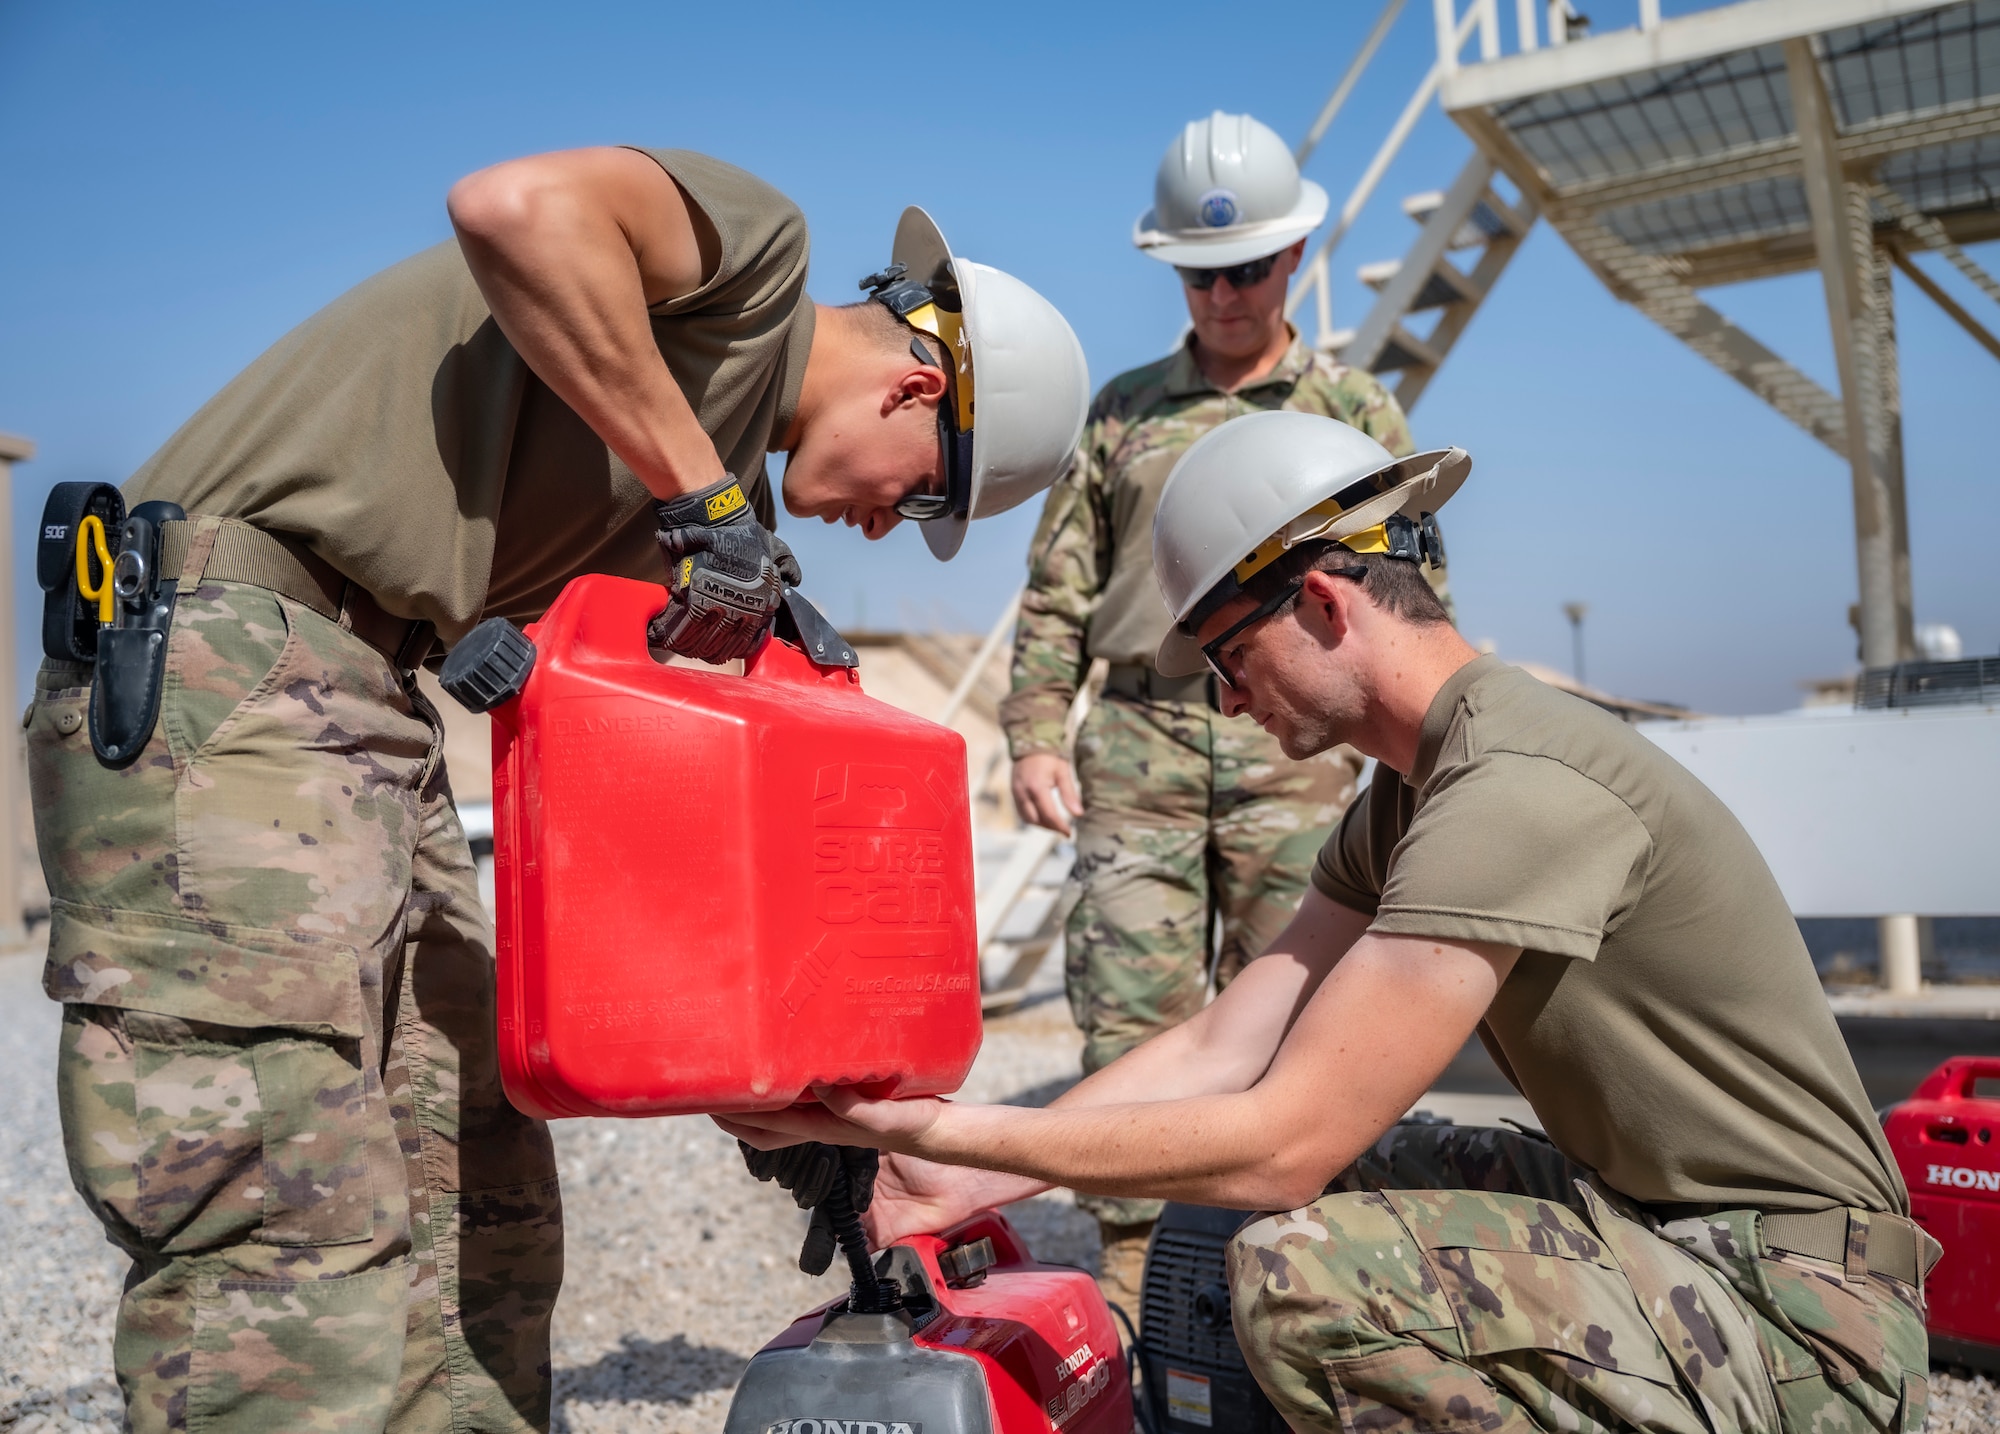 Members of the U.S. Air Forces Central, Air Force Forces A67 Engineering and Installations team fill a generator with gasoline at Ali Al Salem Air Base, Kuwait, Oct. 19, 2021.